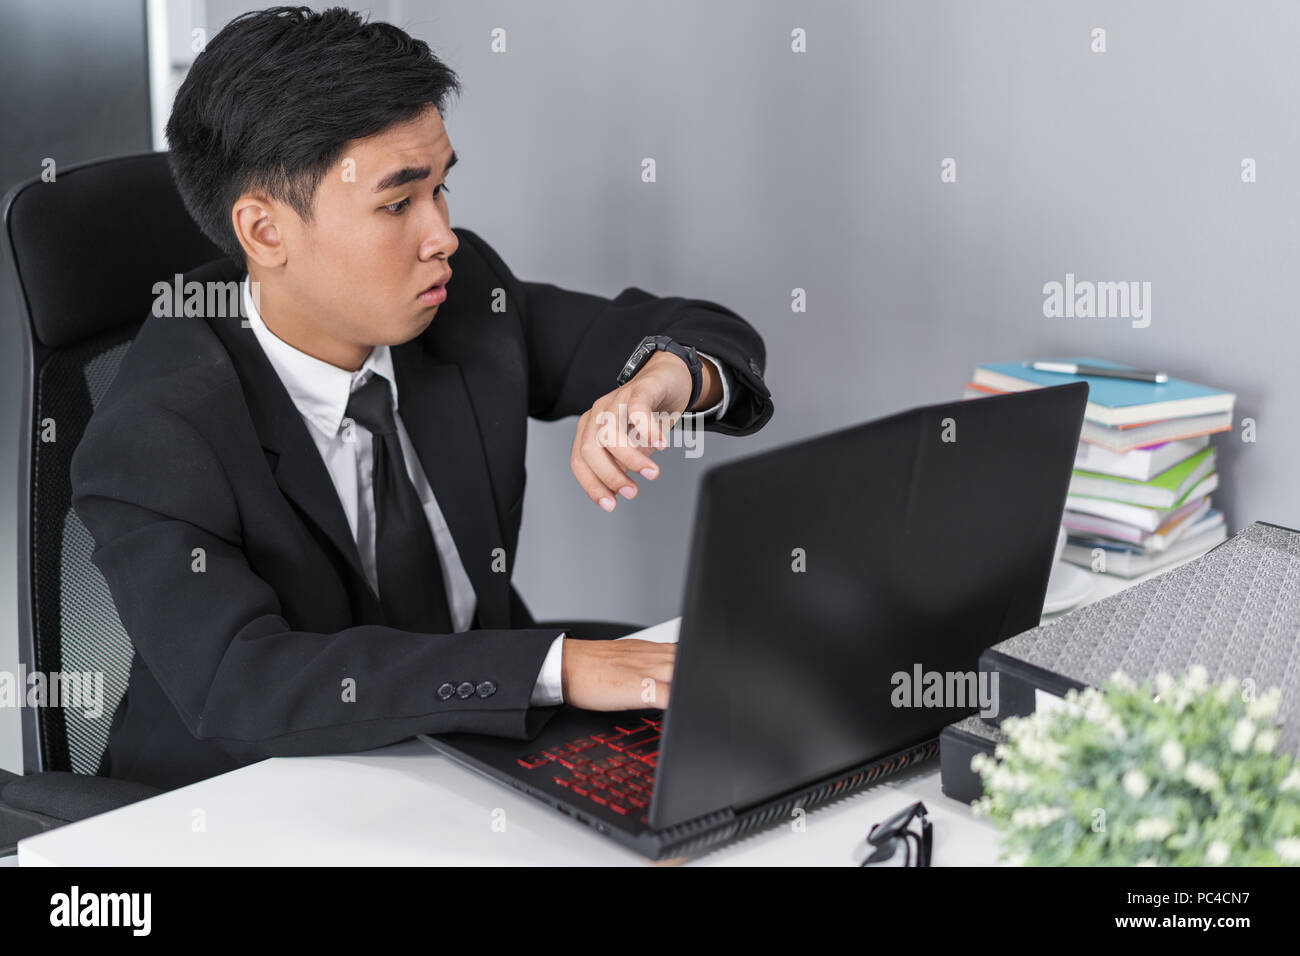 young business man checking time on watch while using laptop Stock Photo